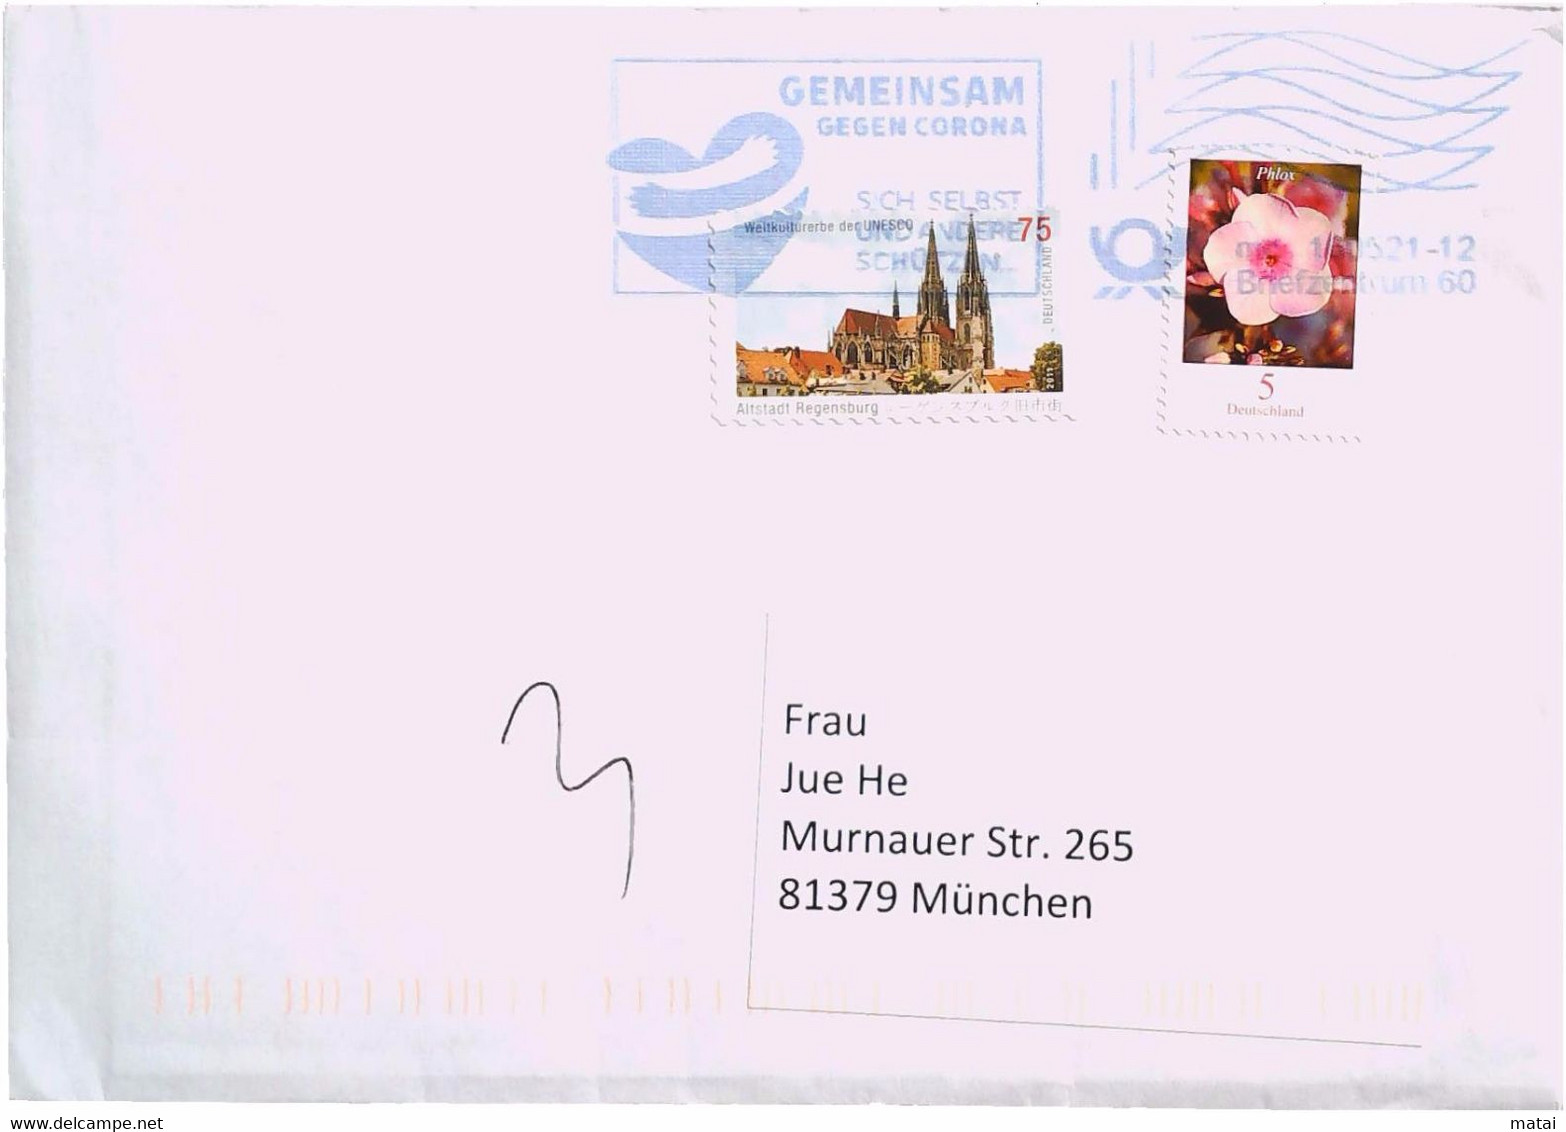 GERMANY COVER WITH  ANTI COVID-19 INFORMATION POSTMARK - Briefe U. Dokumente